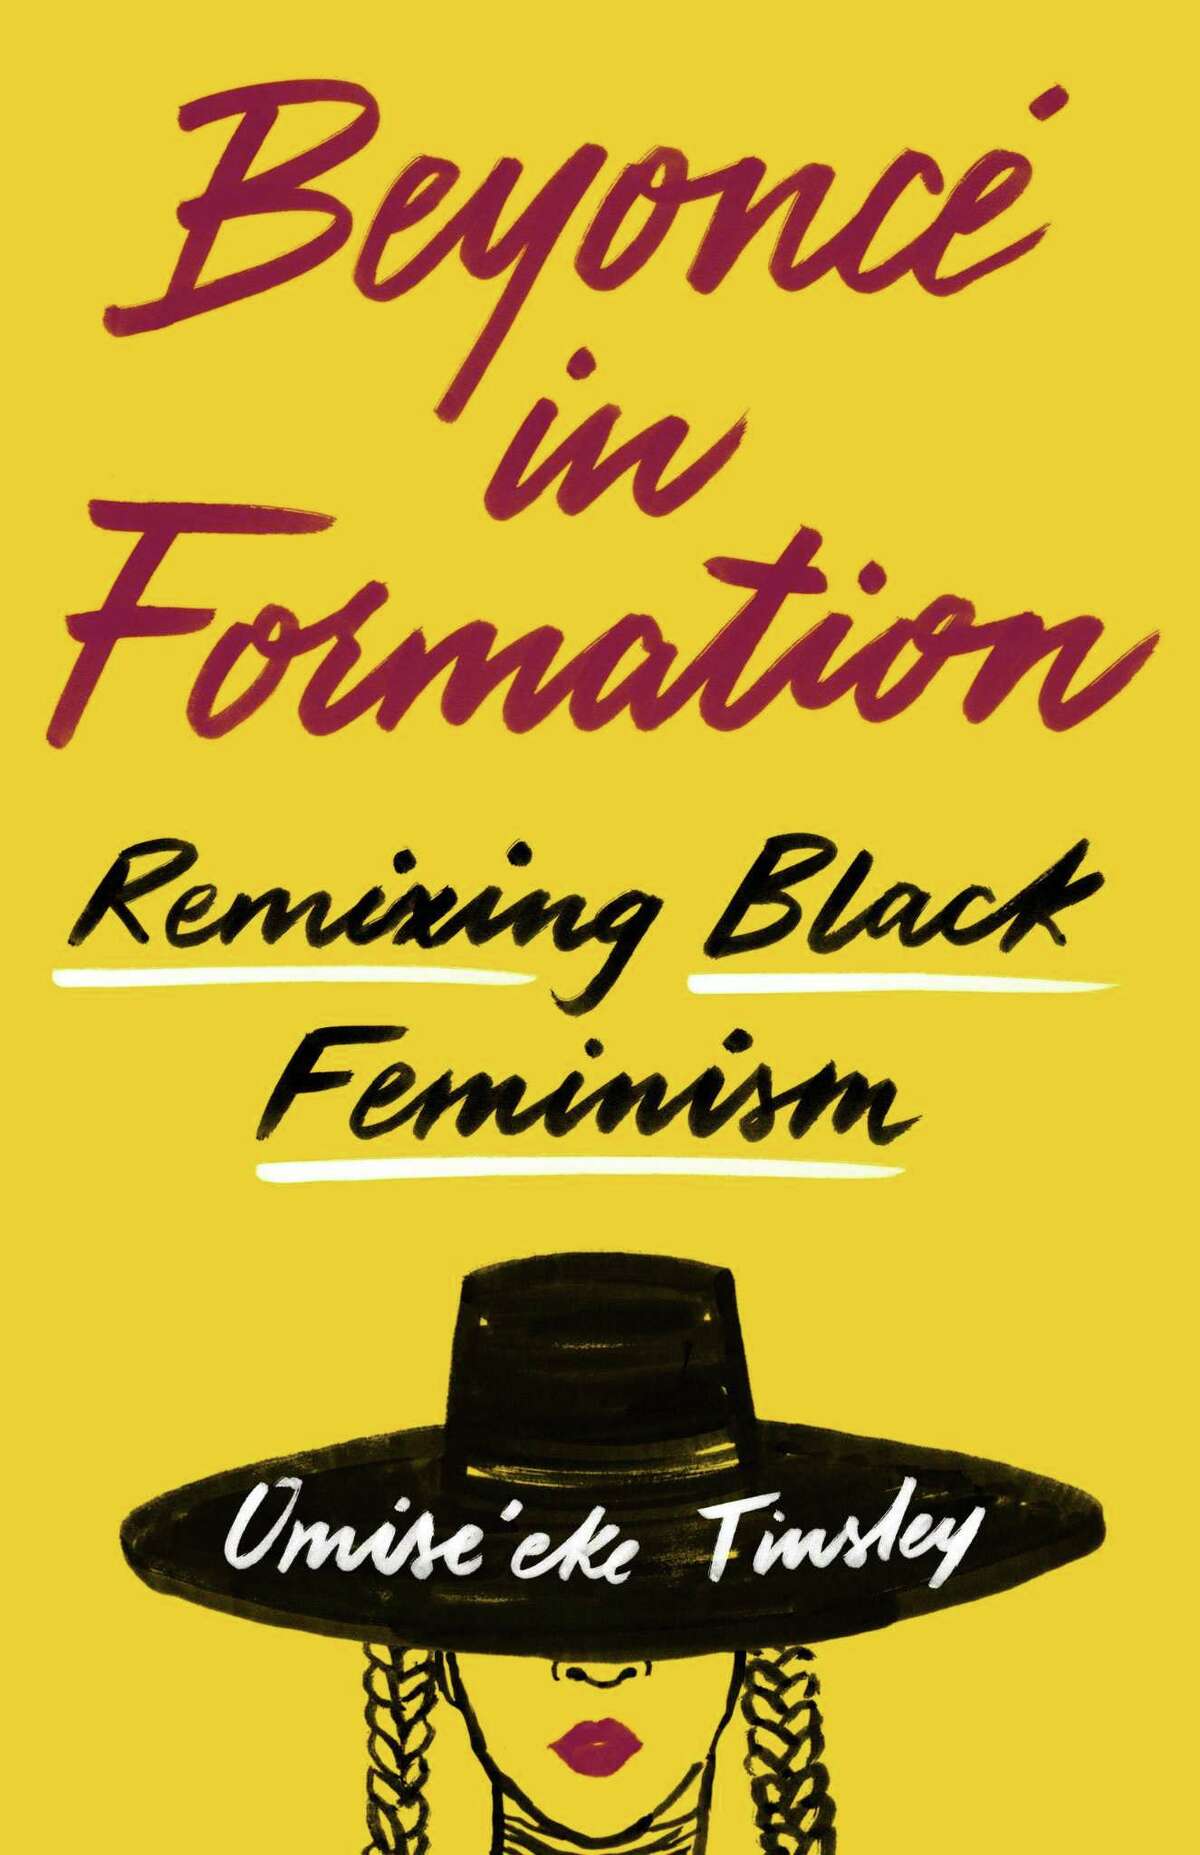 “Beyonce in Formation” by Omise’eke Tinsley, a professor at UT Austin.